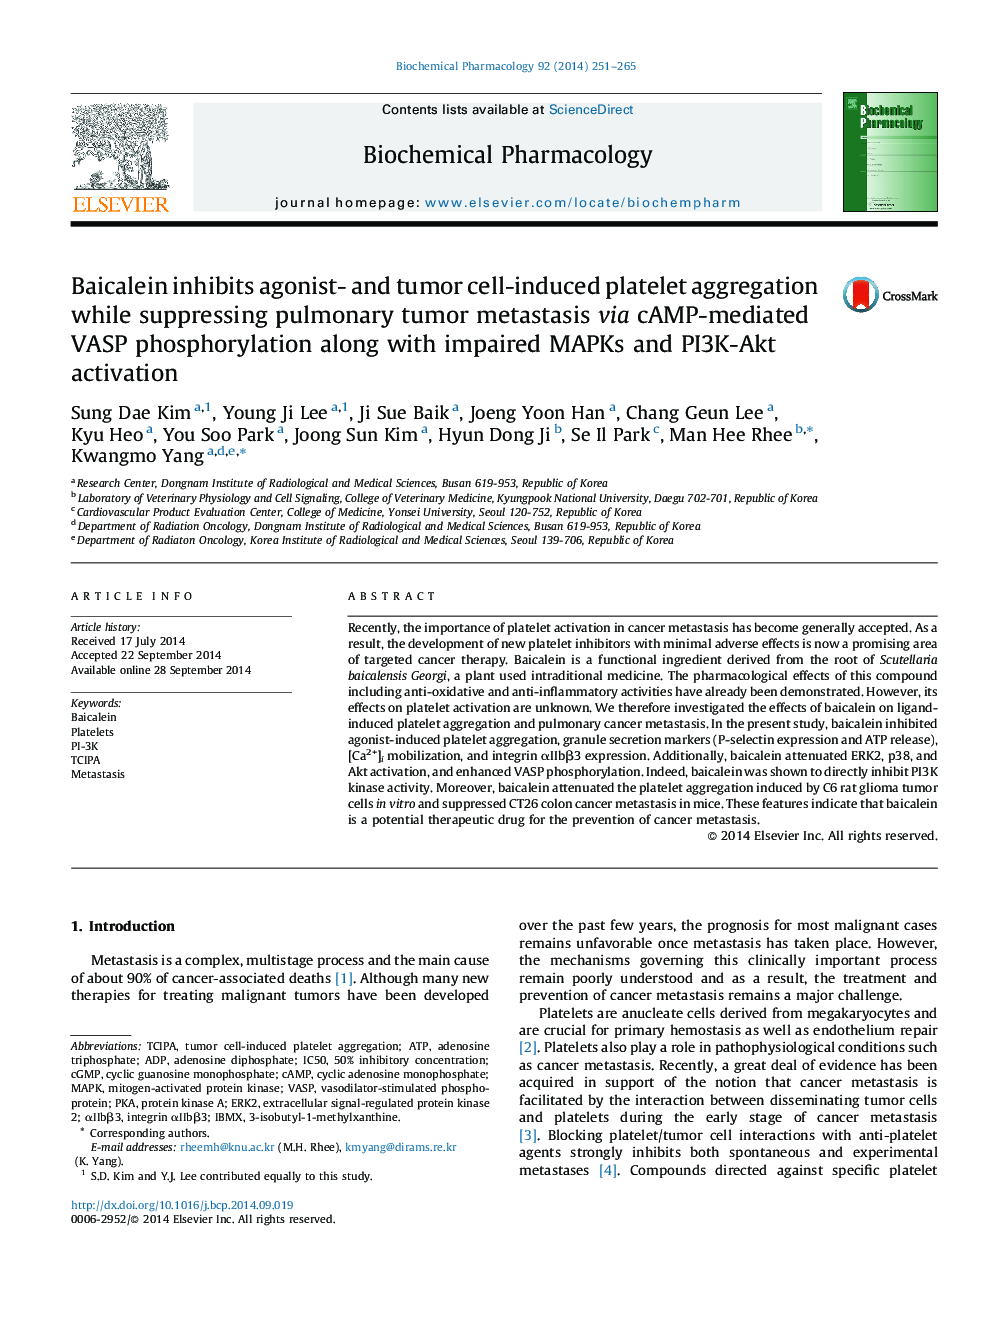 Baicalein inhibits agonist- and tumor cell-induced platelet aggregation while suppressing pulmonary tumor metastasis via cAMP-mediated VASP phosphorylation along with impaired MAPKs and PI3K-Akt activation